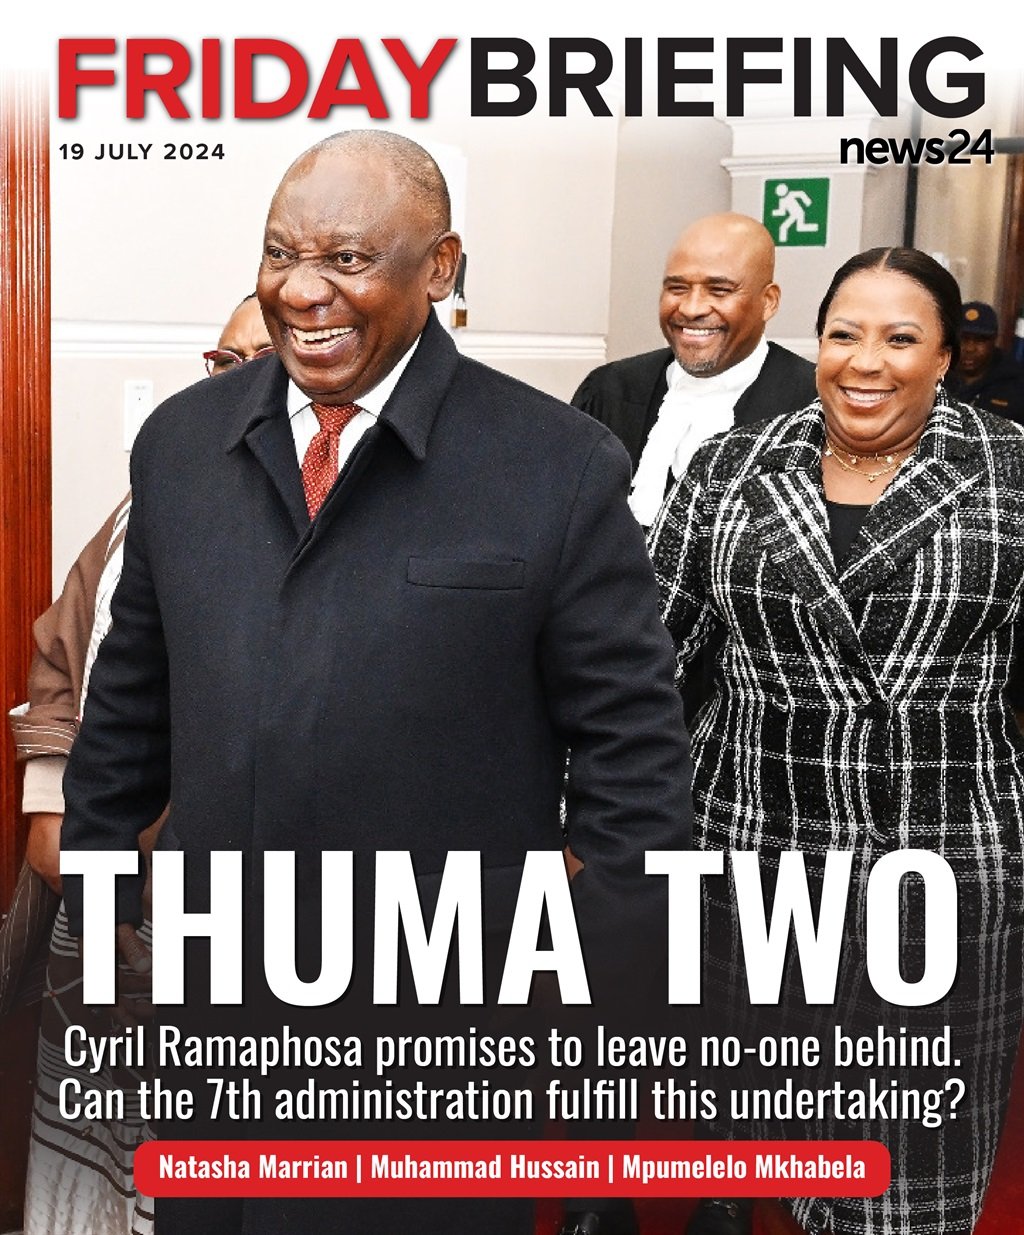 News24 | FRIDAY BRIEFING | Thuma two: Will the seventh administration leave no-one behind?